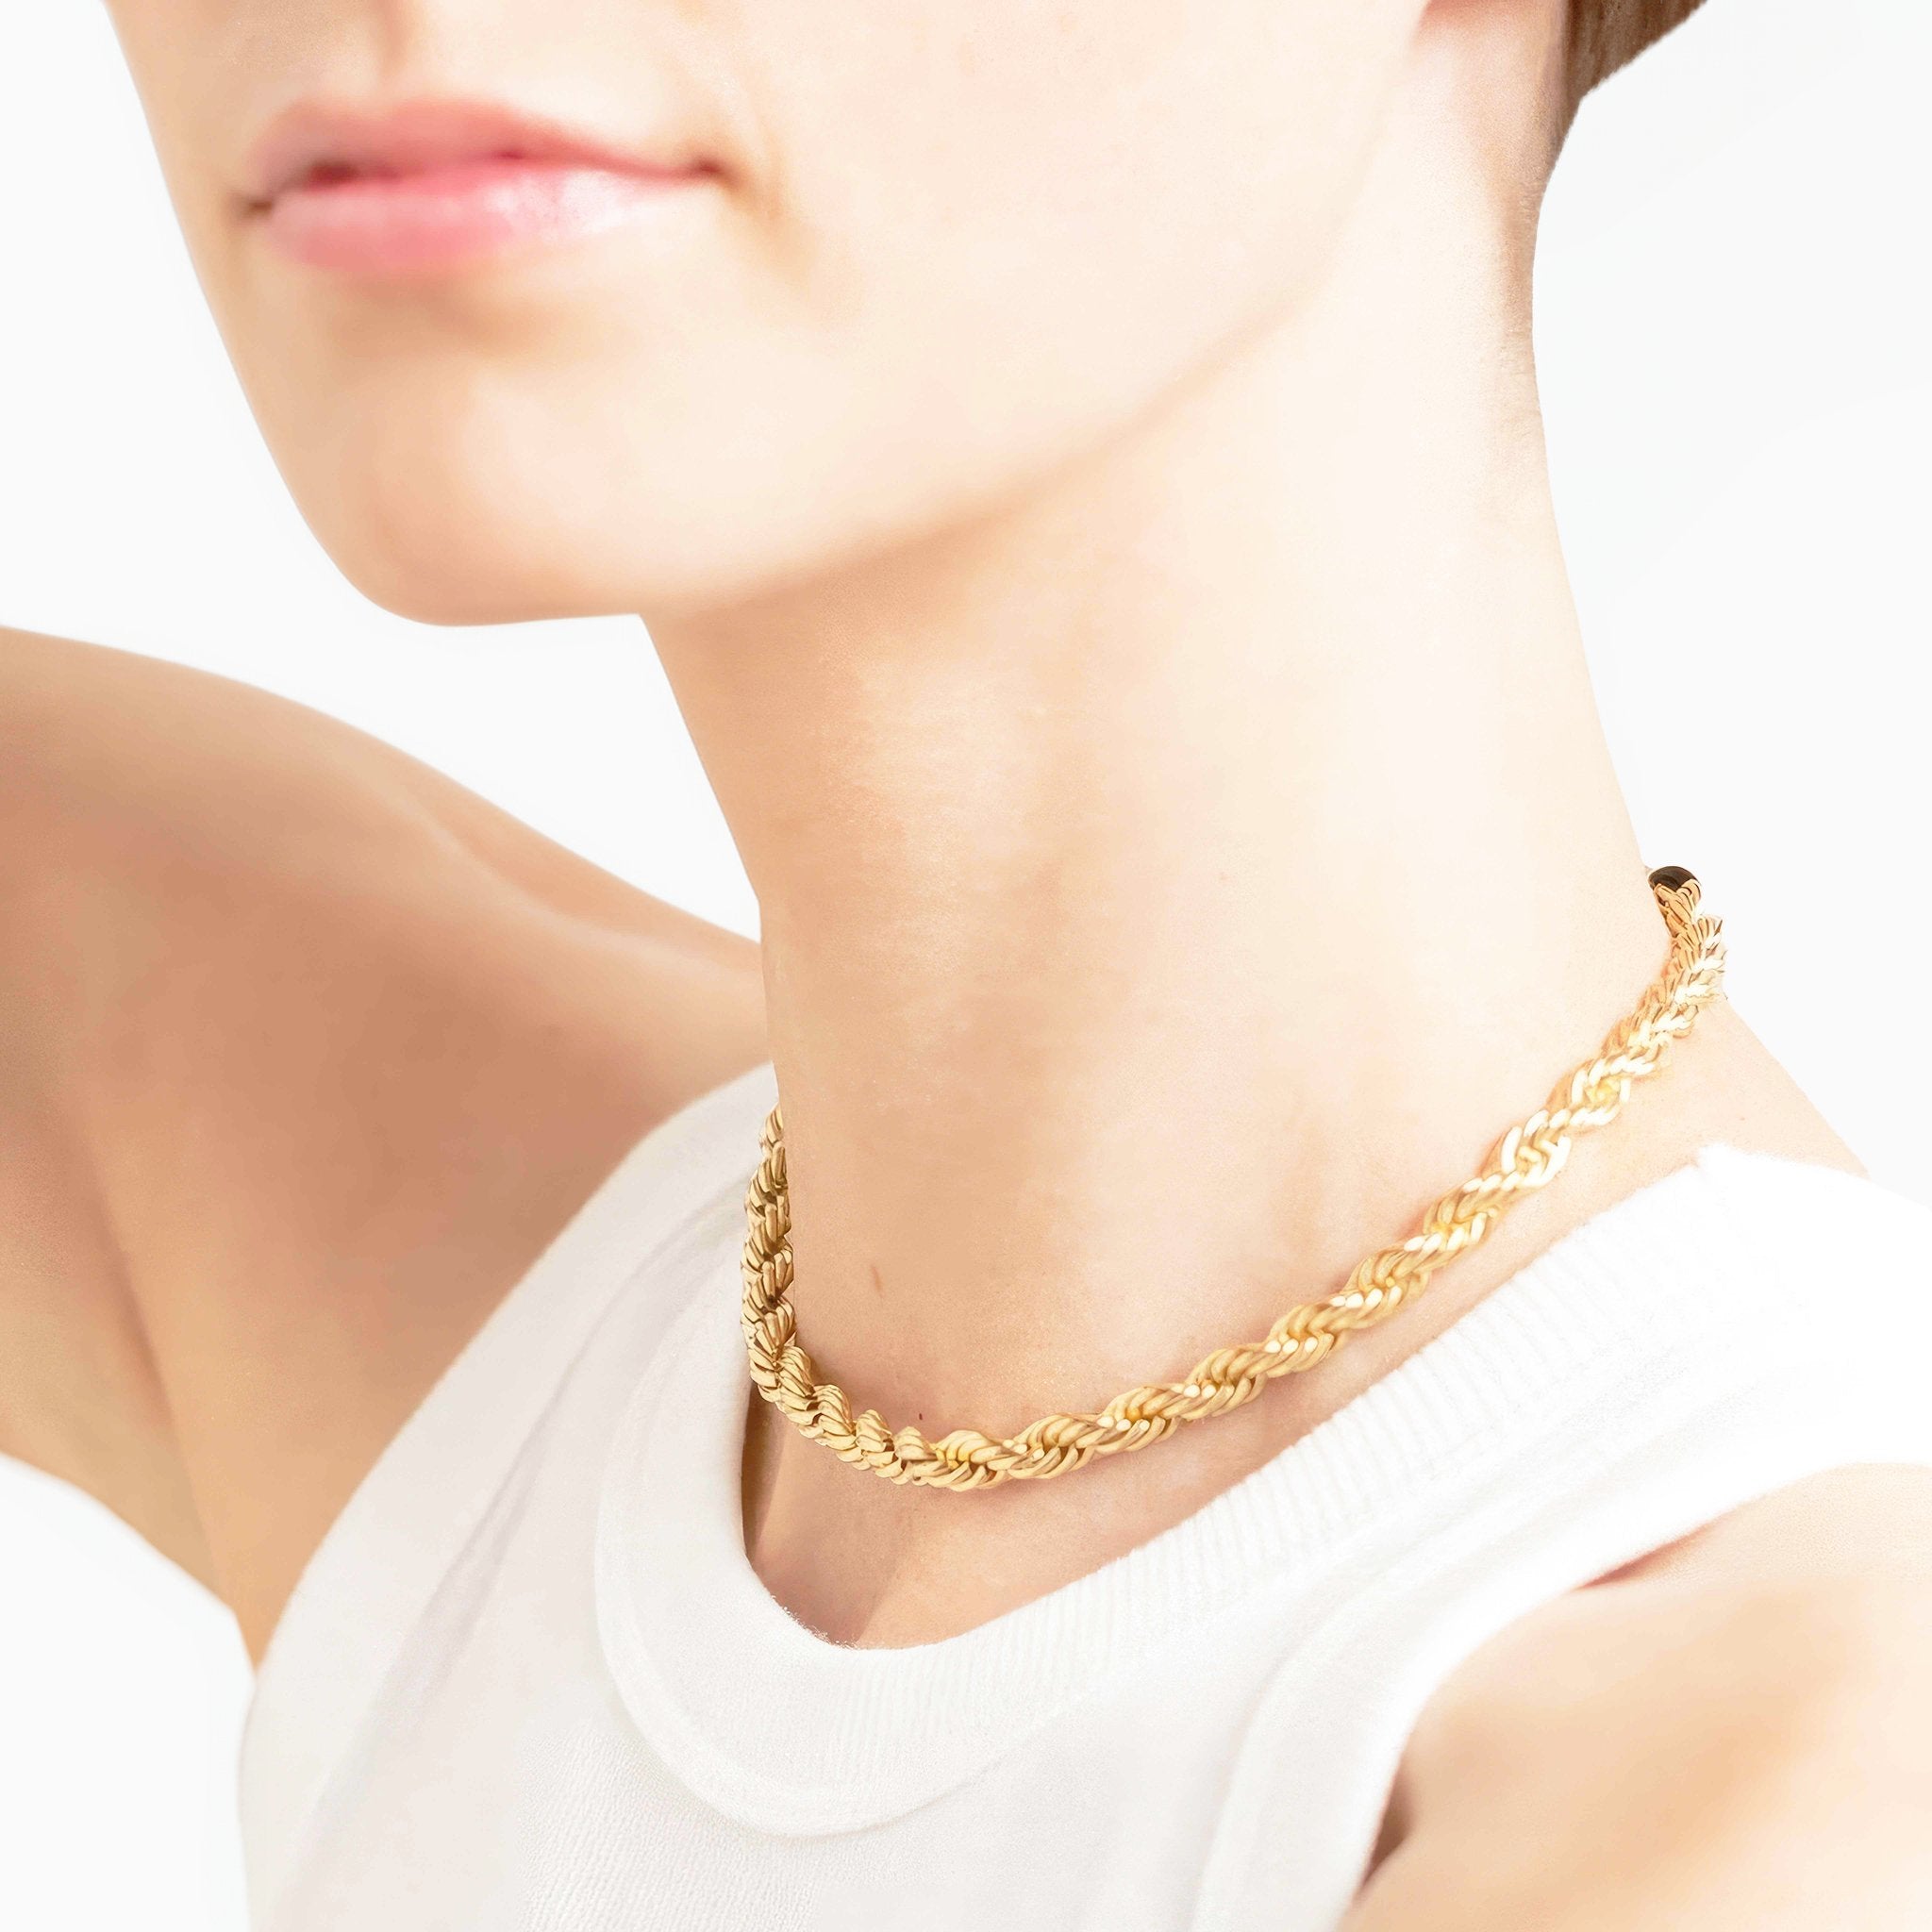 Twist Design Necklace - Nobbier - Necklace - 18K Gold And Titanium PVD Coated Jewelry